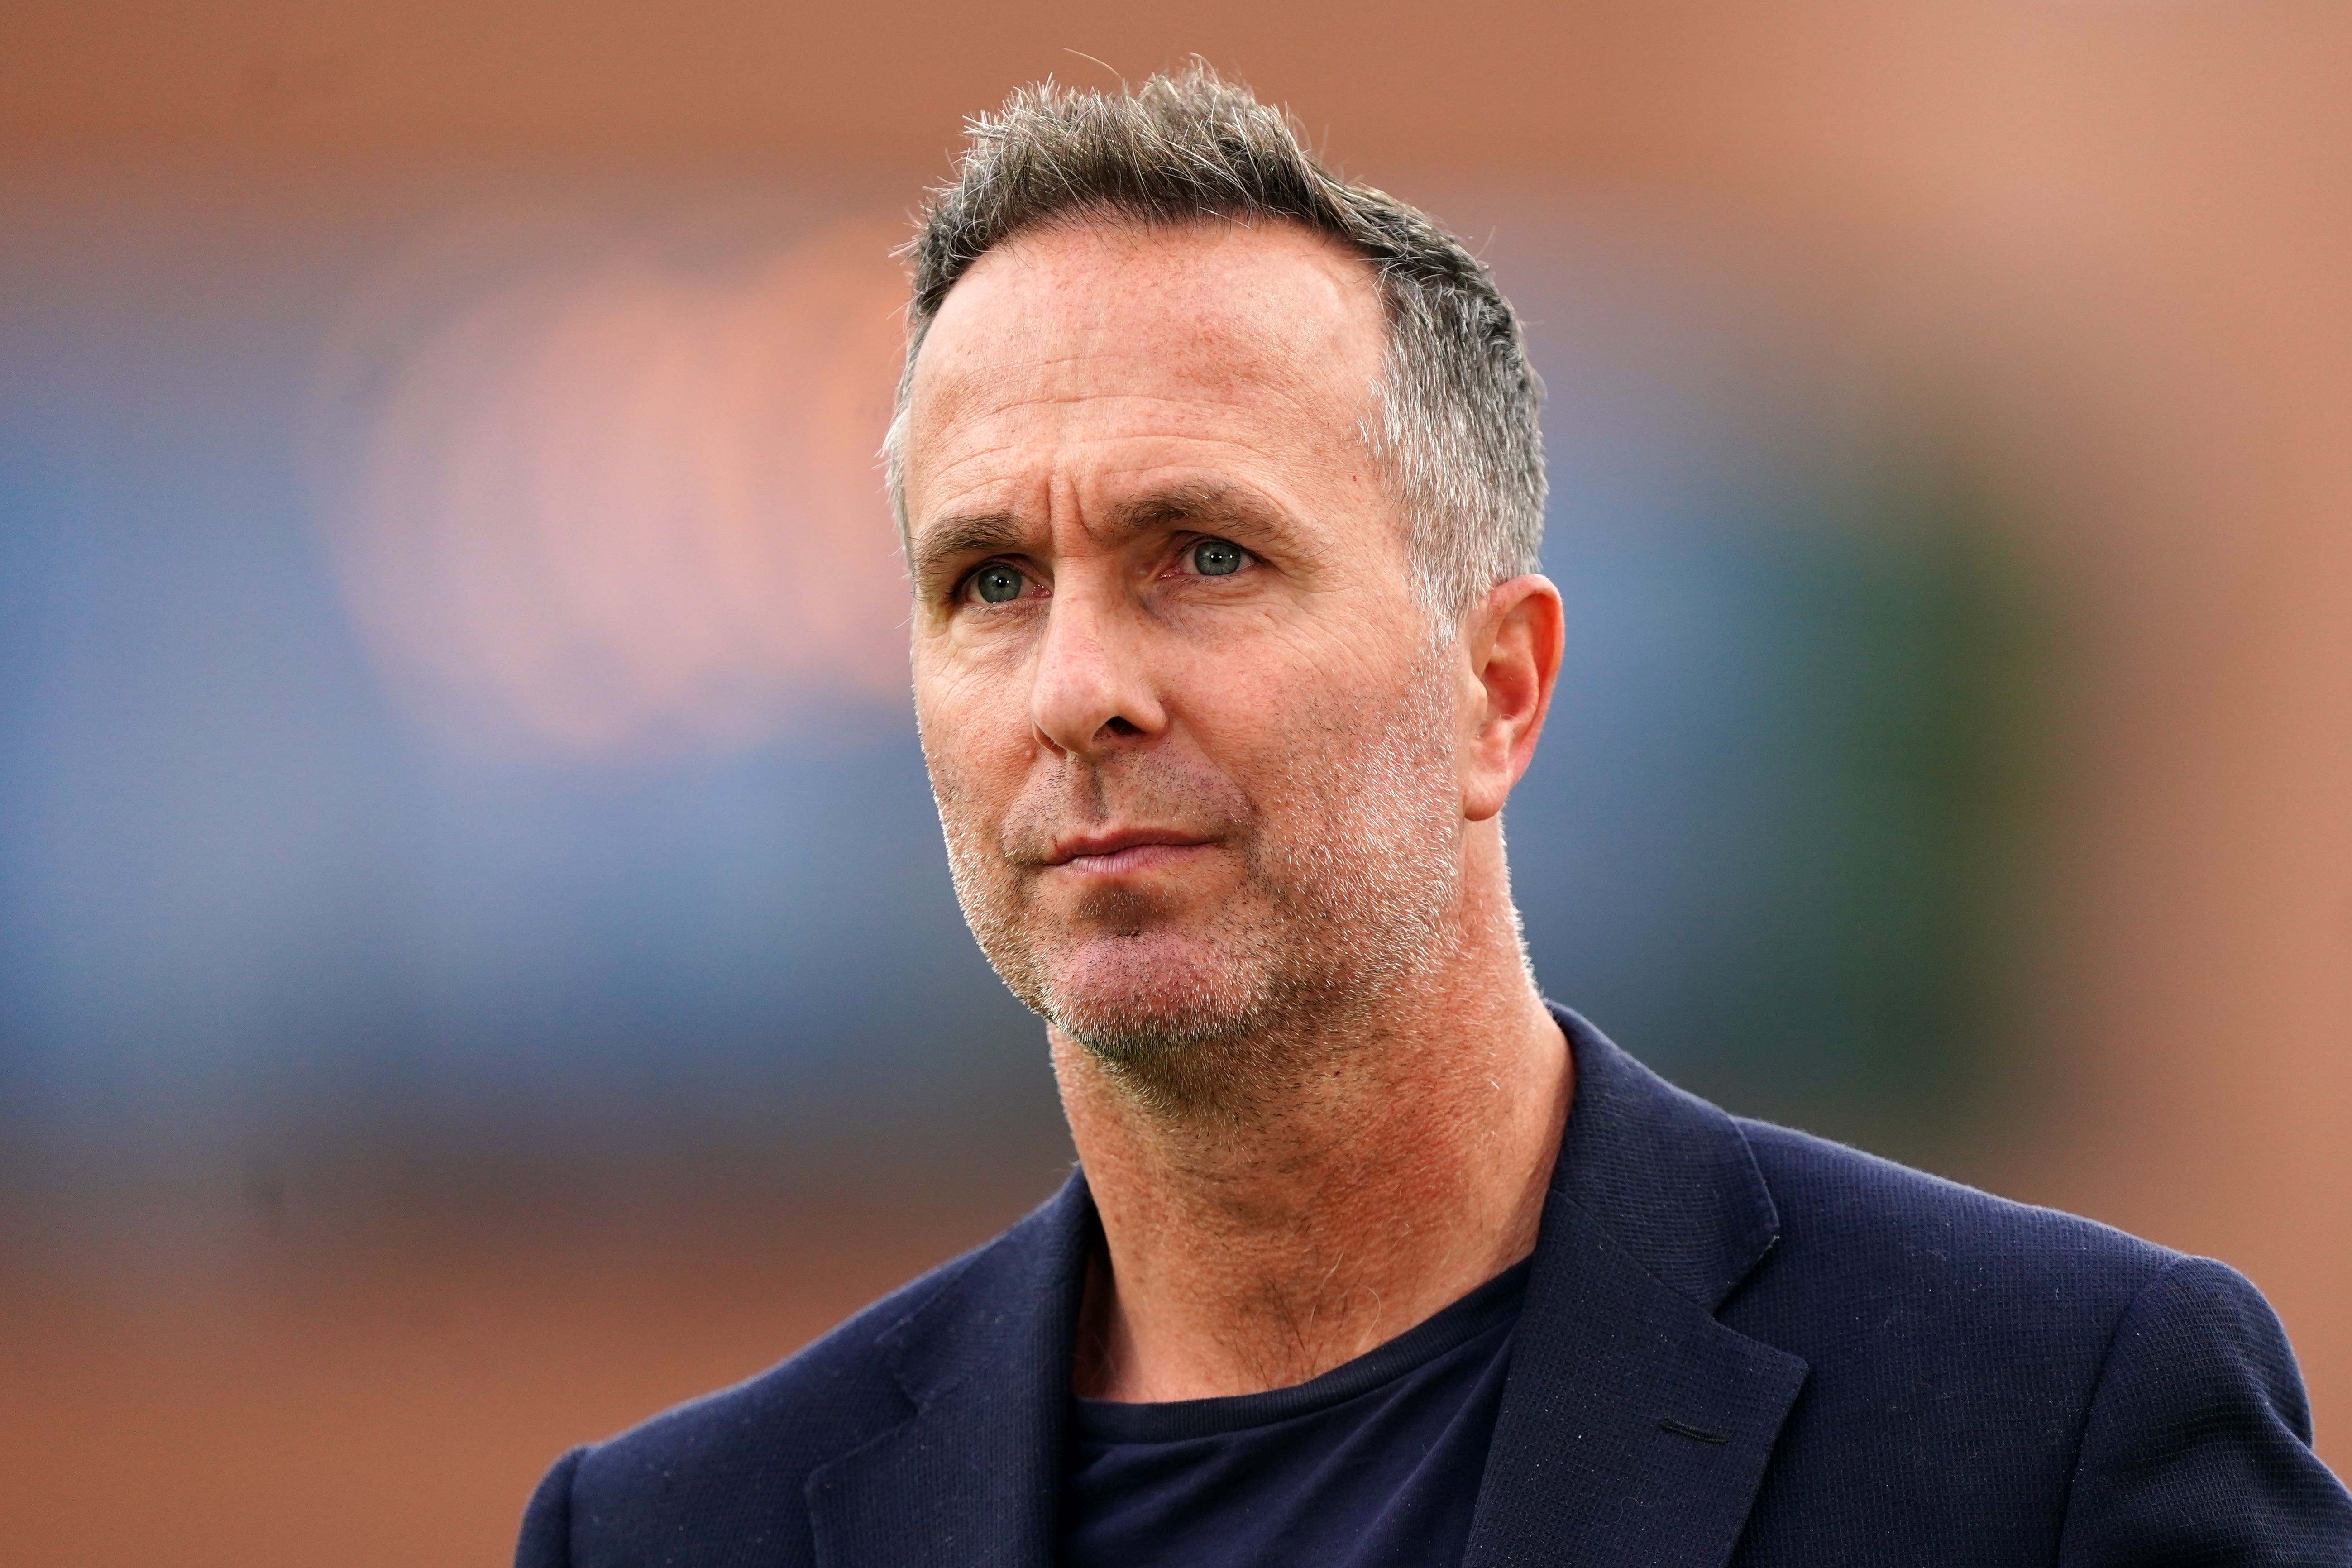 Michael Vaughan, pictured, is the only charged individual still set to appear at a disciplinary hearing in relation to racism allegations made by his former Yorkshire team-mate Azeem Rafiq